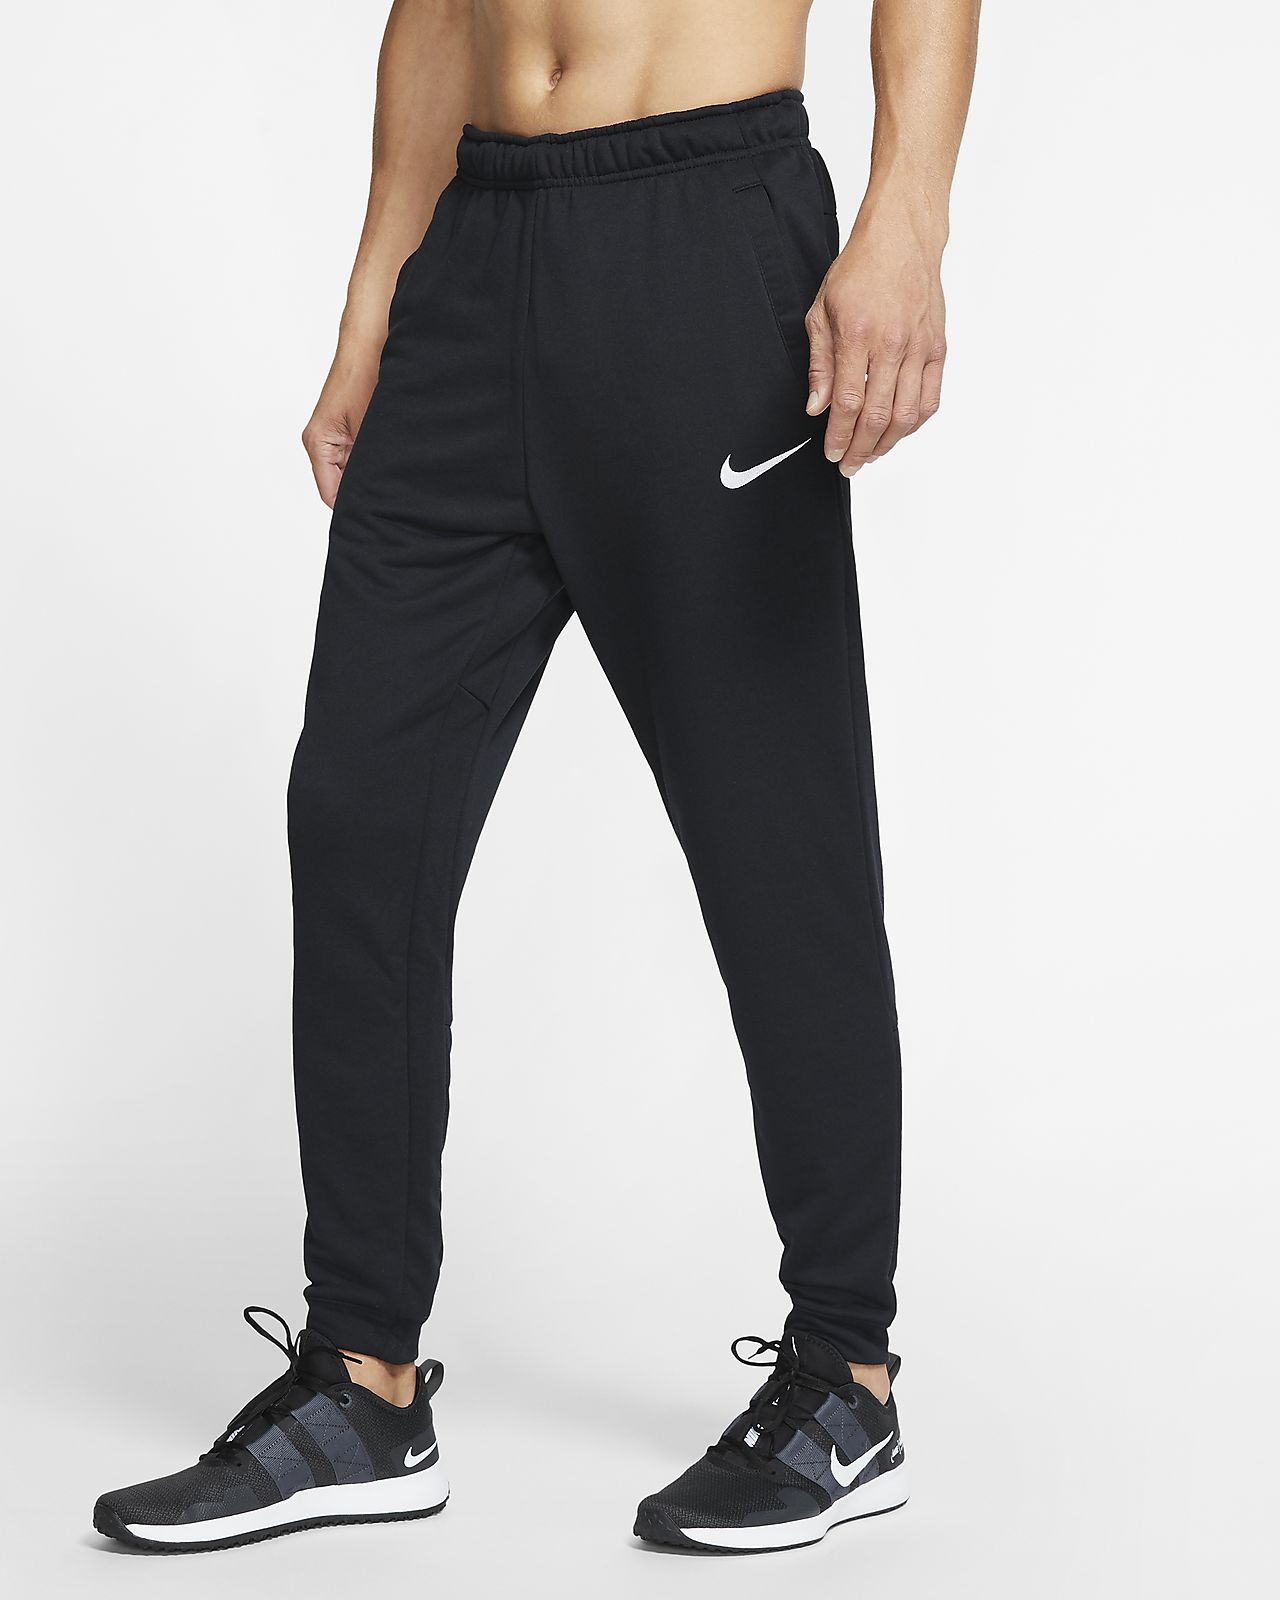 Take - nike dry fit - 60% off for All 